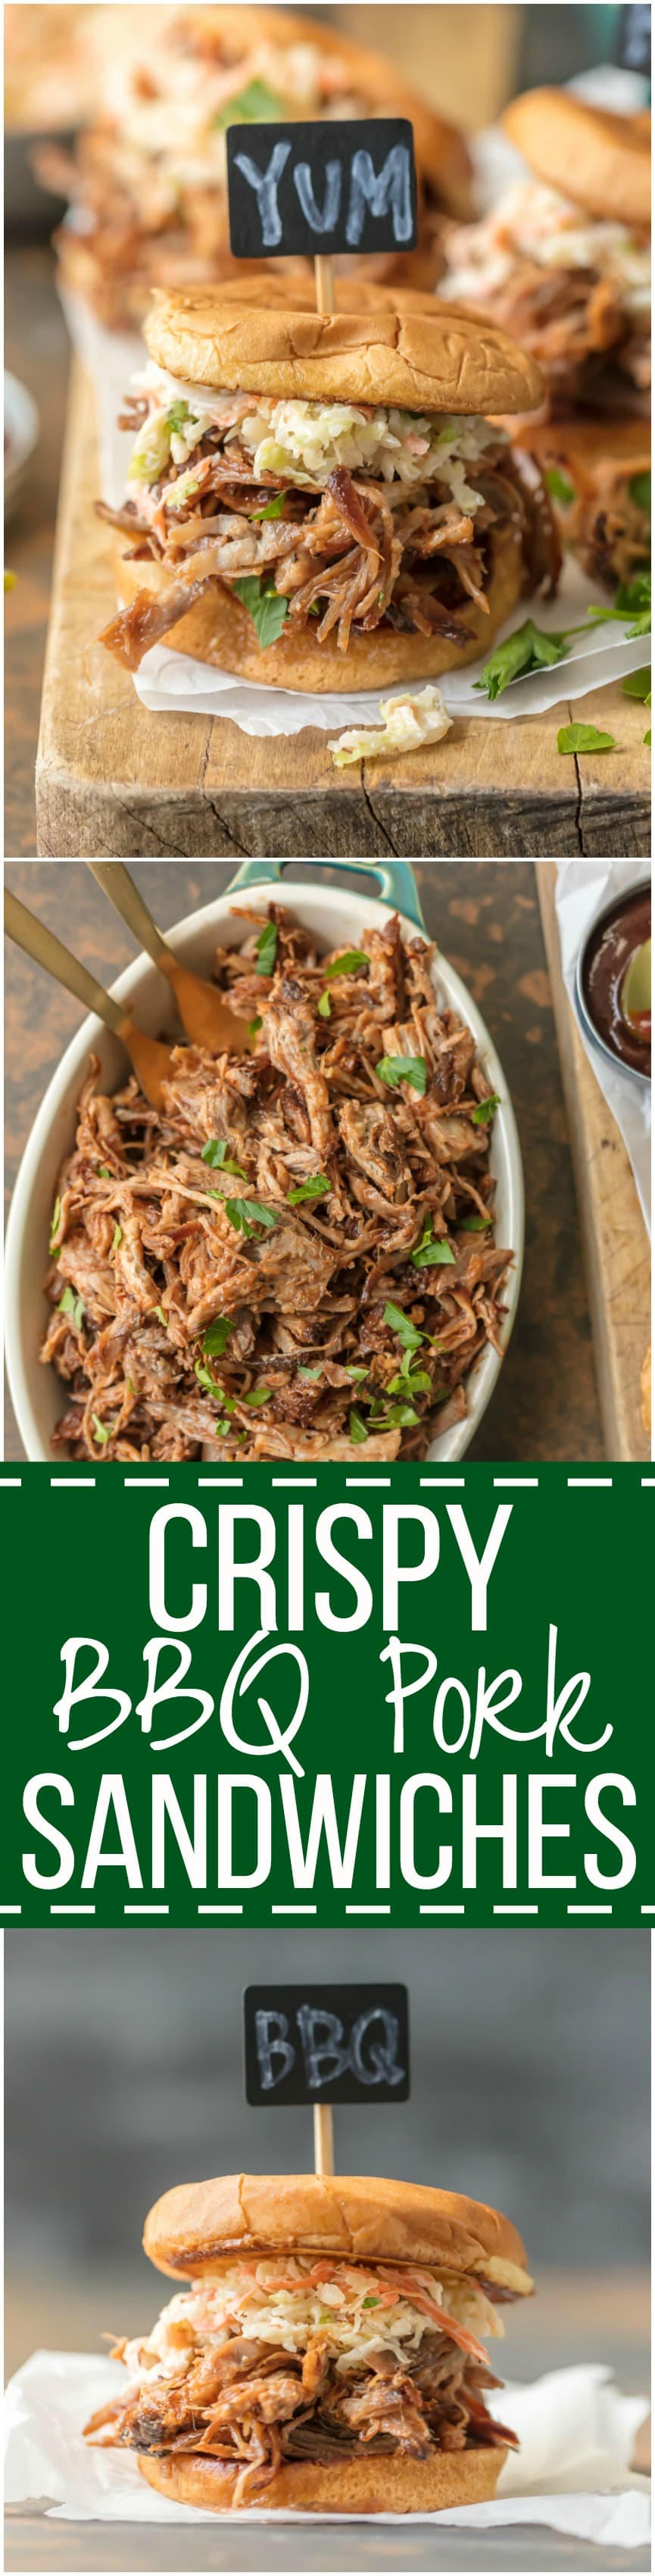 These CRISPY BBQ PORK SANDWICHES are the ultimate fun finger food for any party! Use the meat for sliders, stuff them into quesadillas, or eat it over rice. The possibilities are endless!